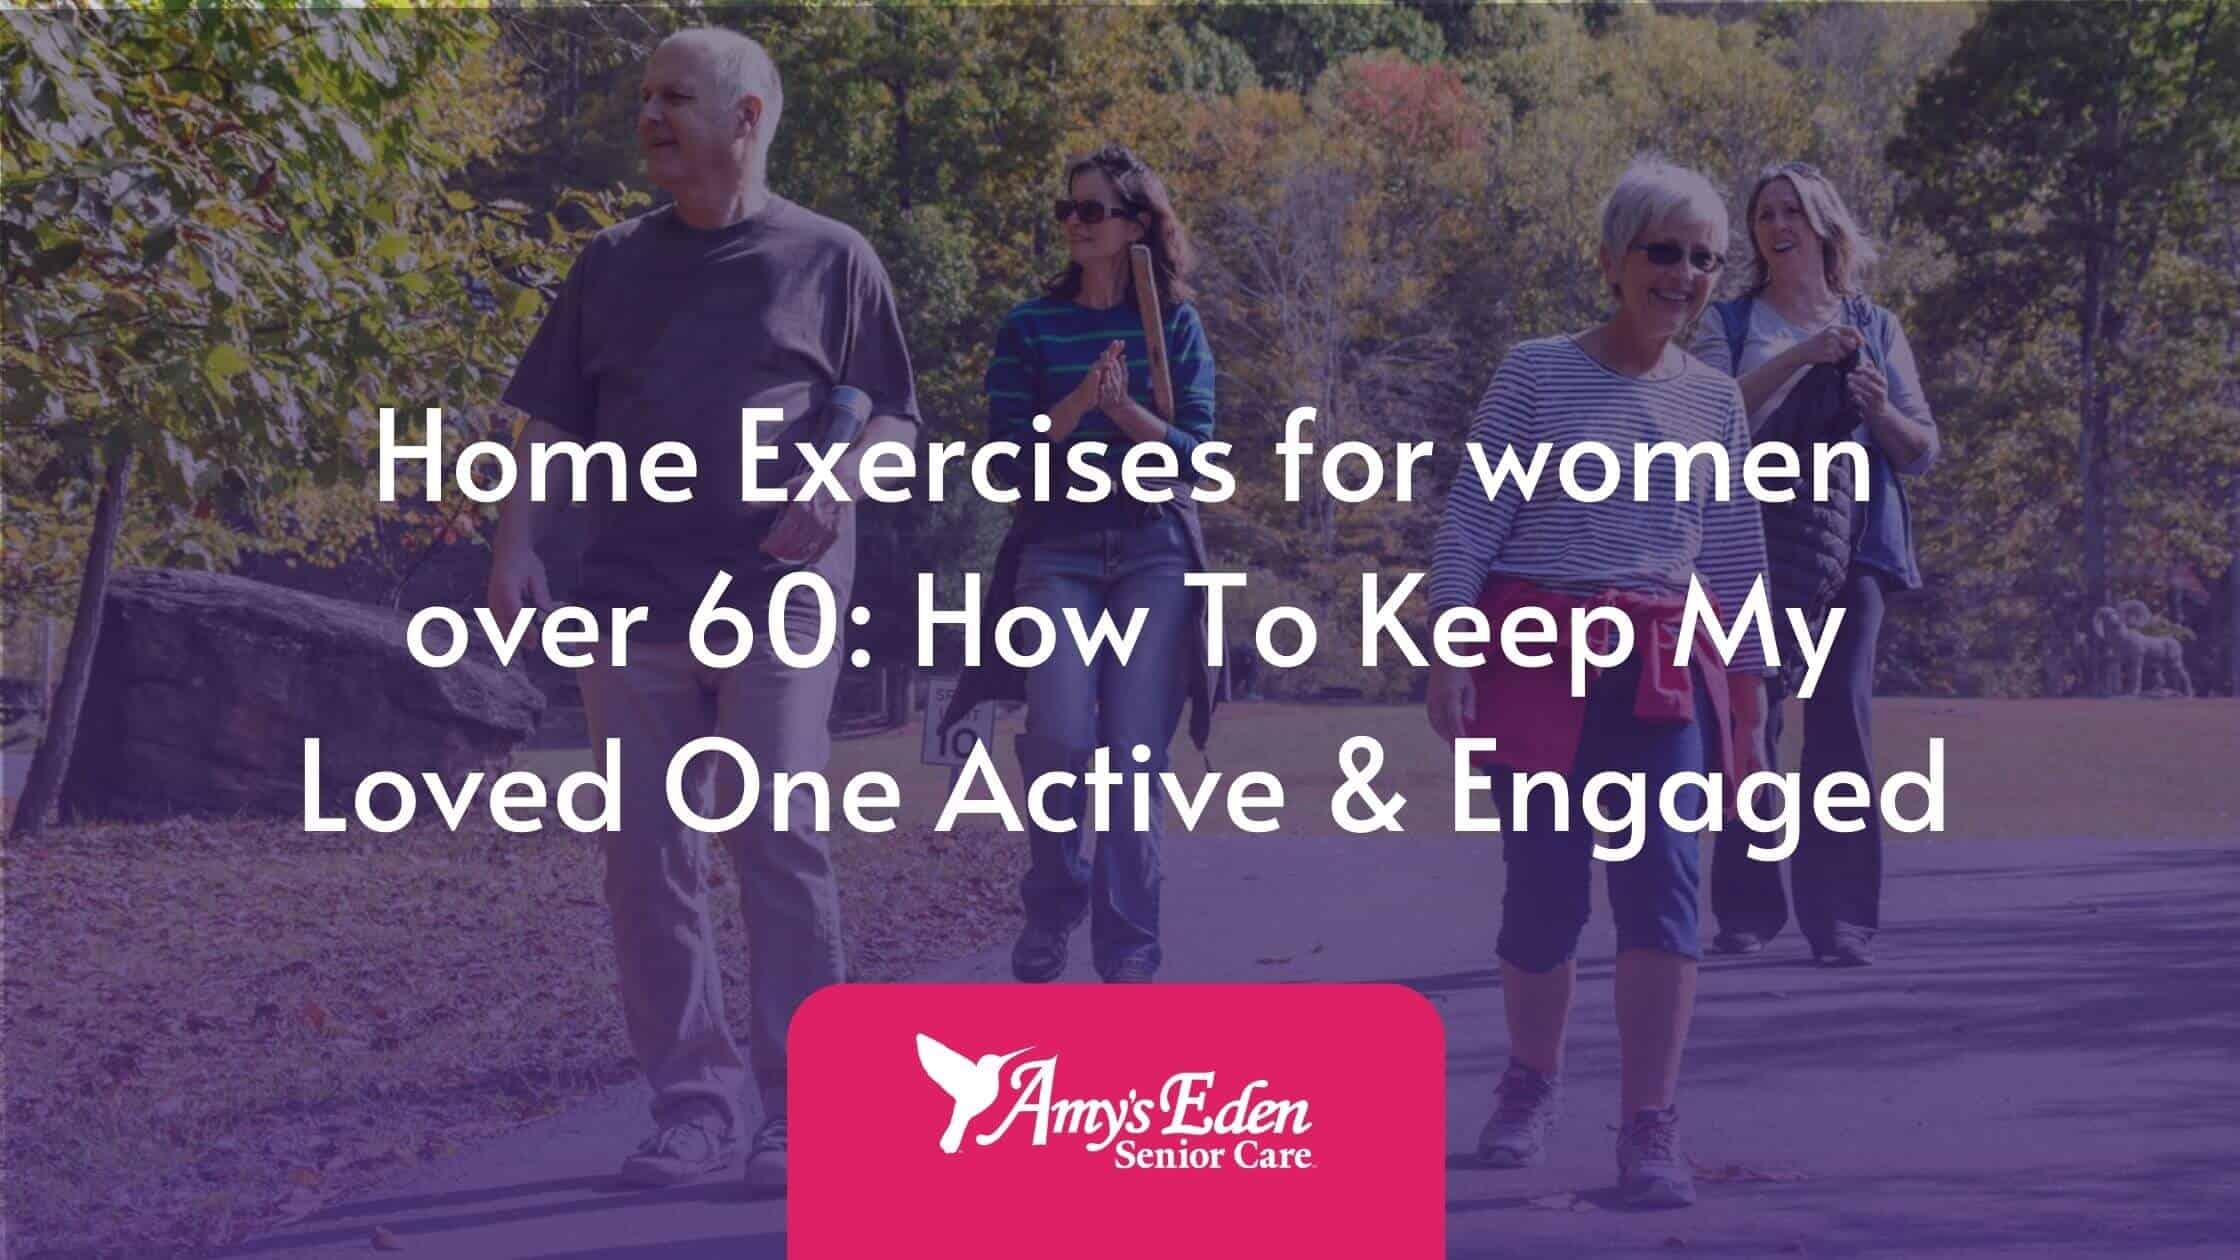 Home Exercises for women over 60: How To Keep My Loved